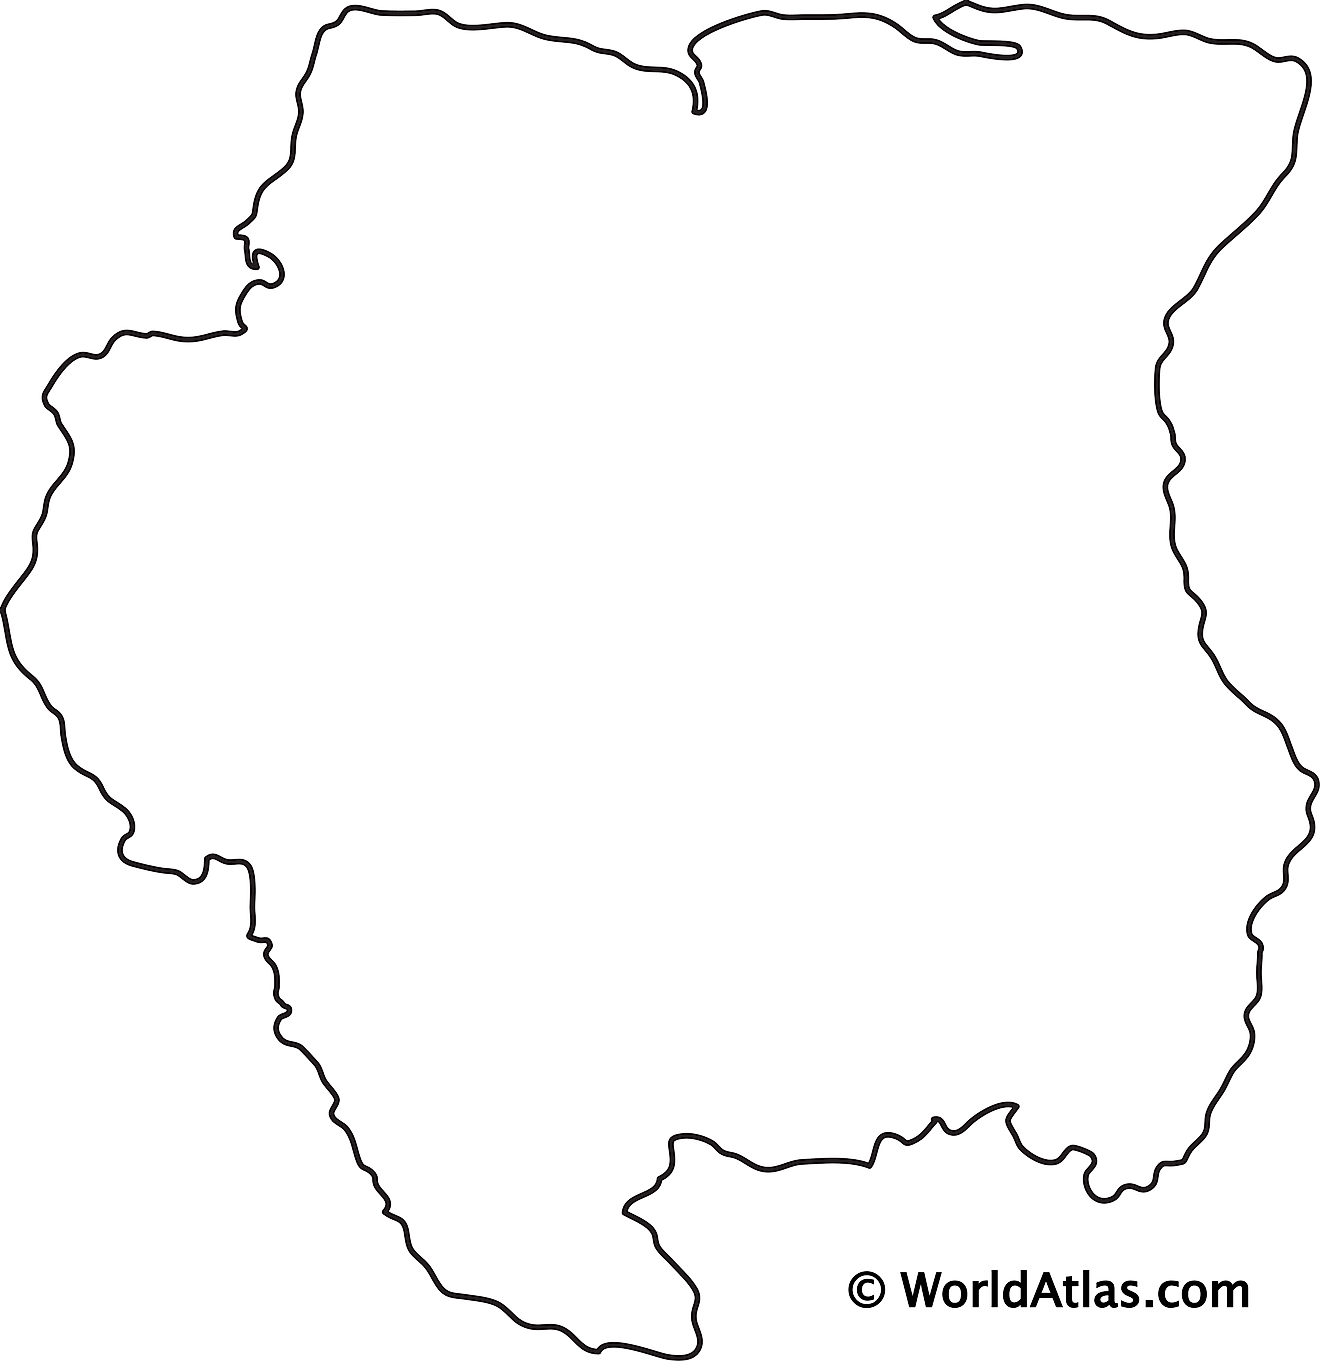 Blank Outline Map of Suriname